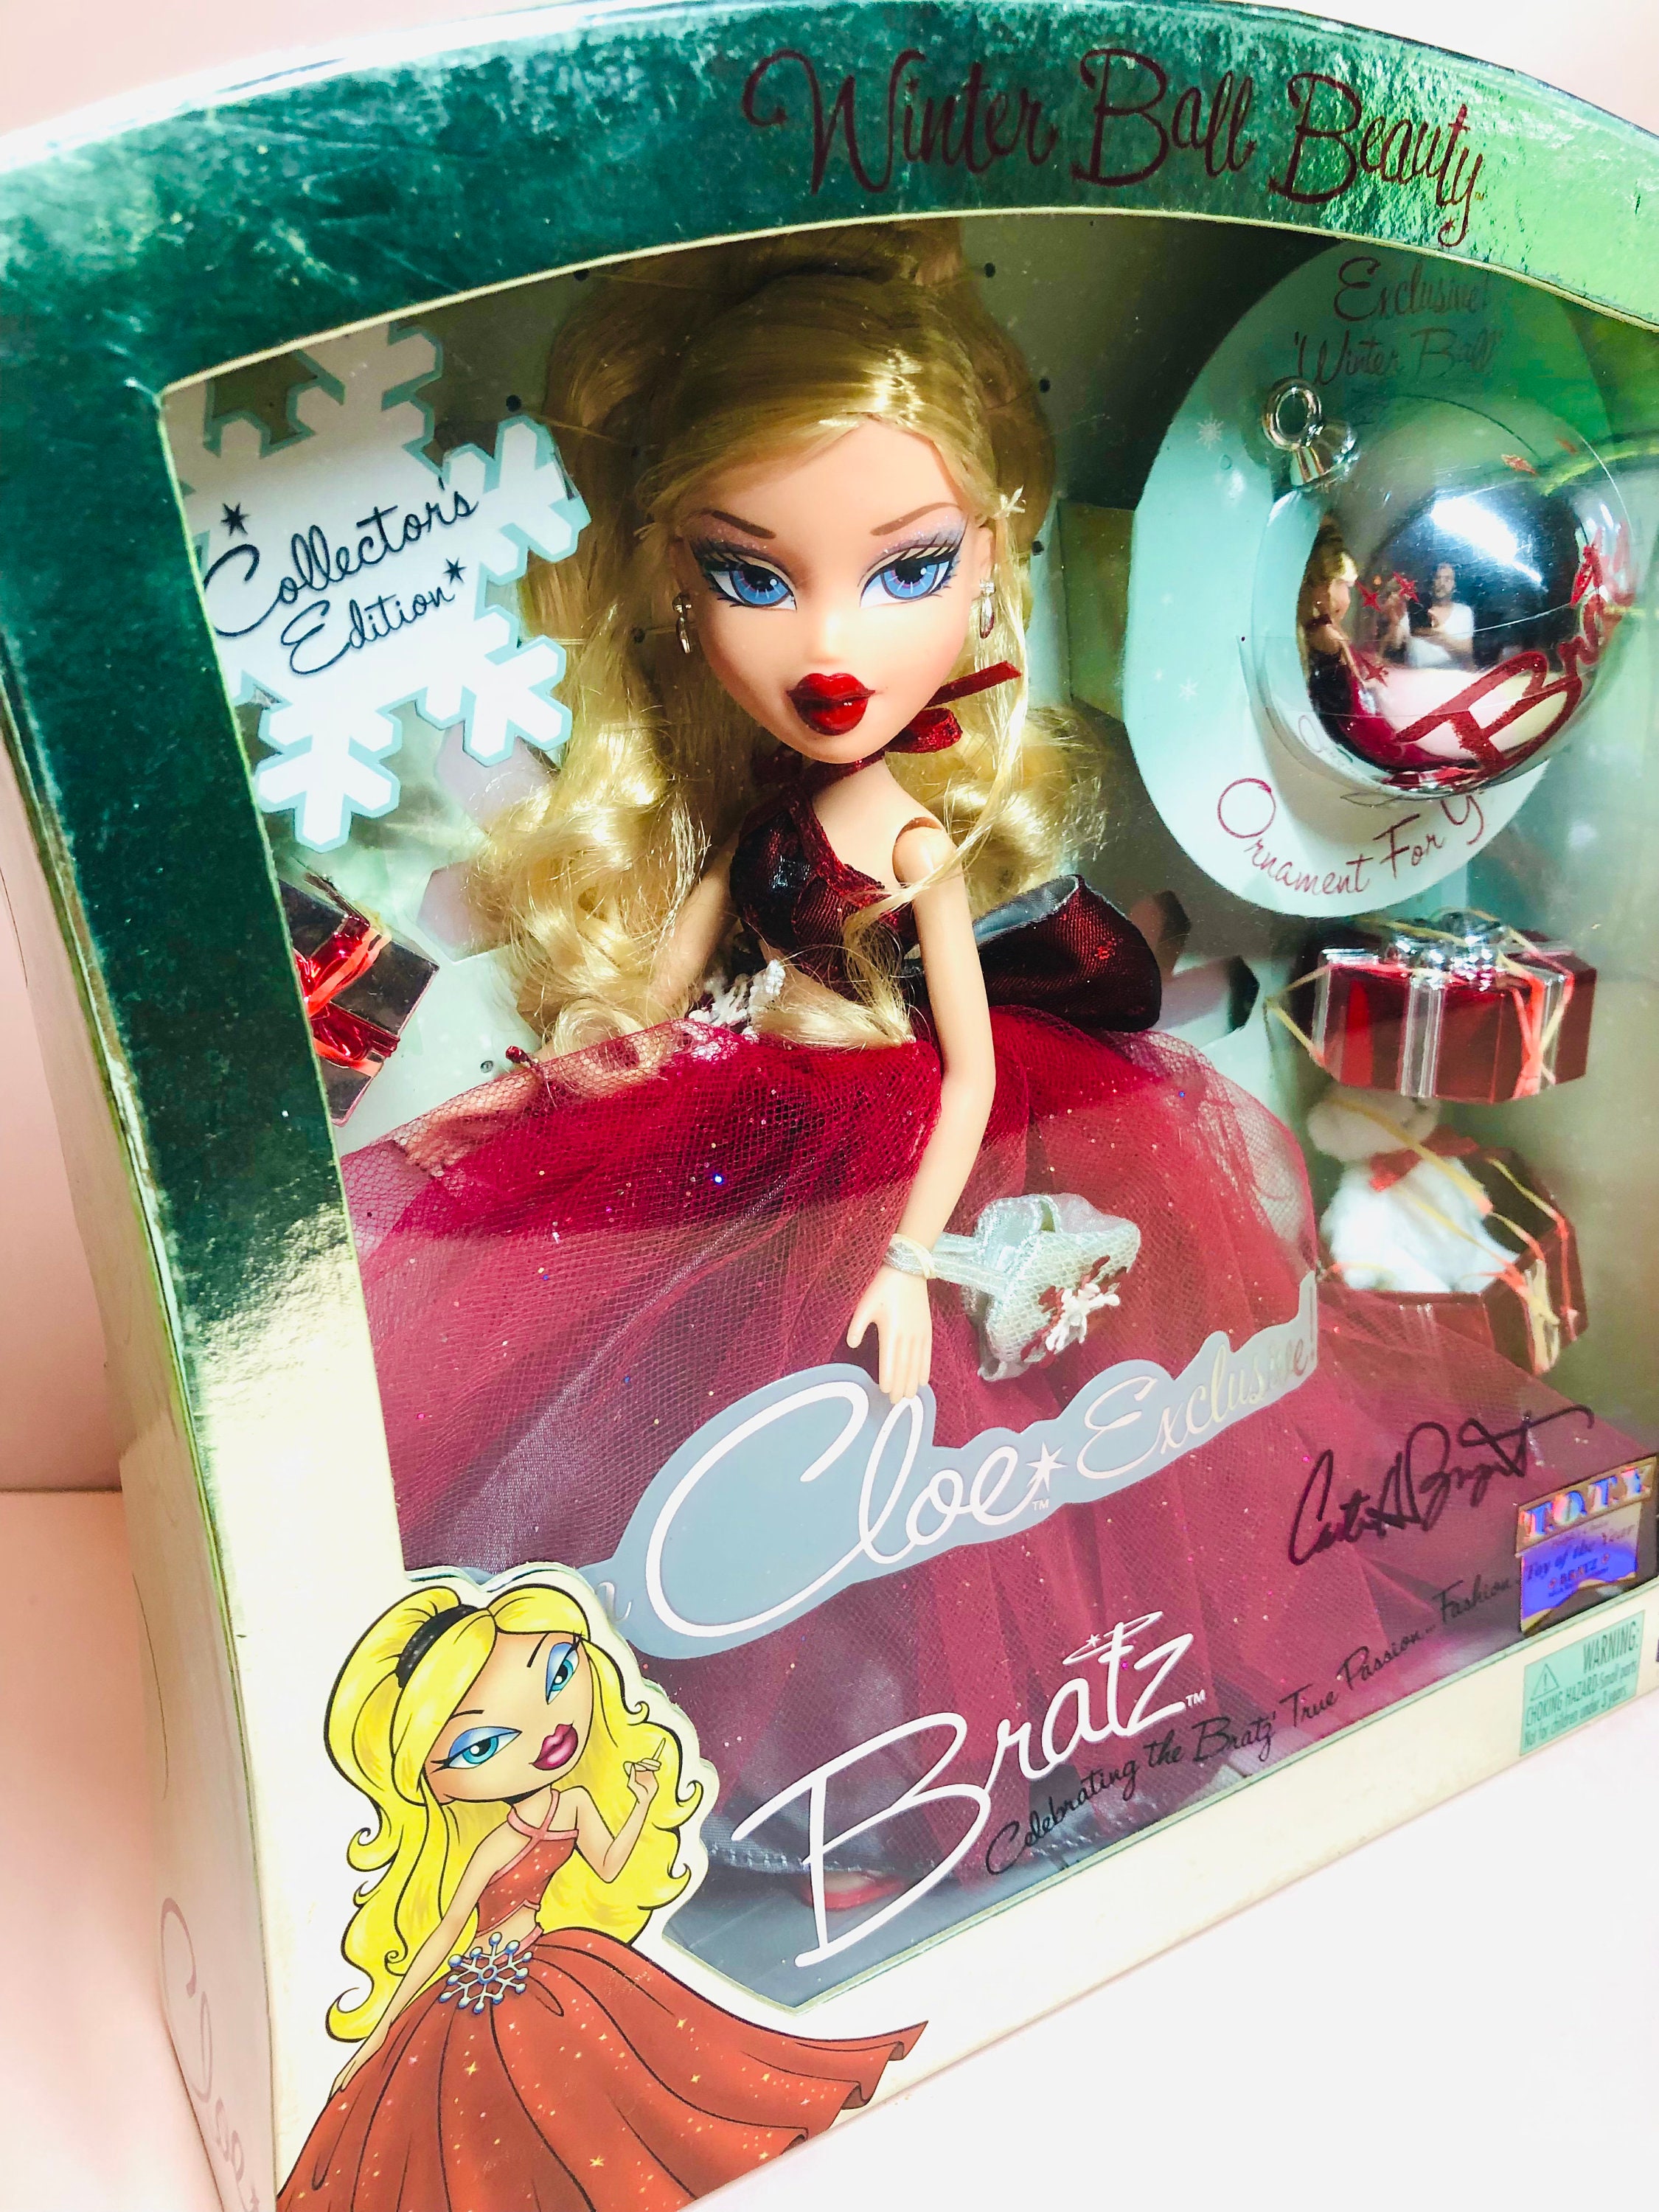 Bratz Winterball Beauty Cloe Original Edition. Autographed by Bratz Creator  Carter Bryant. From His Personal Collection. -  Finland